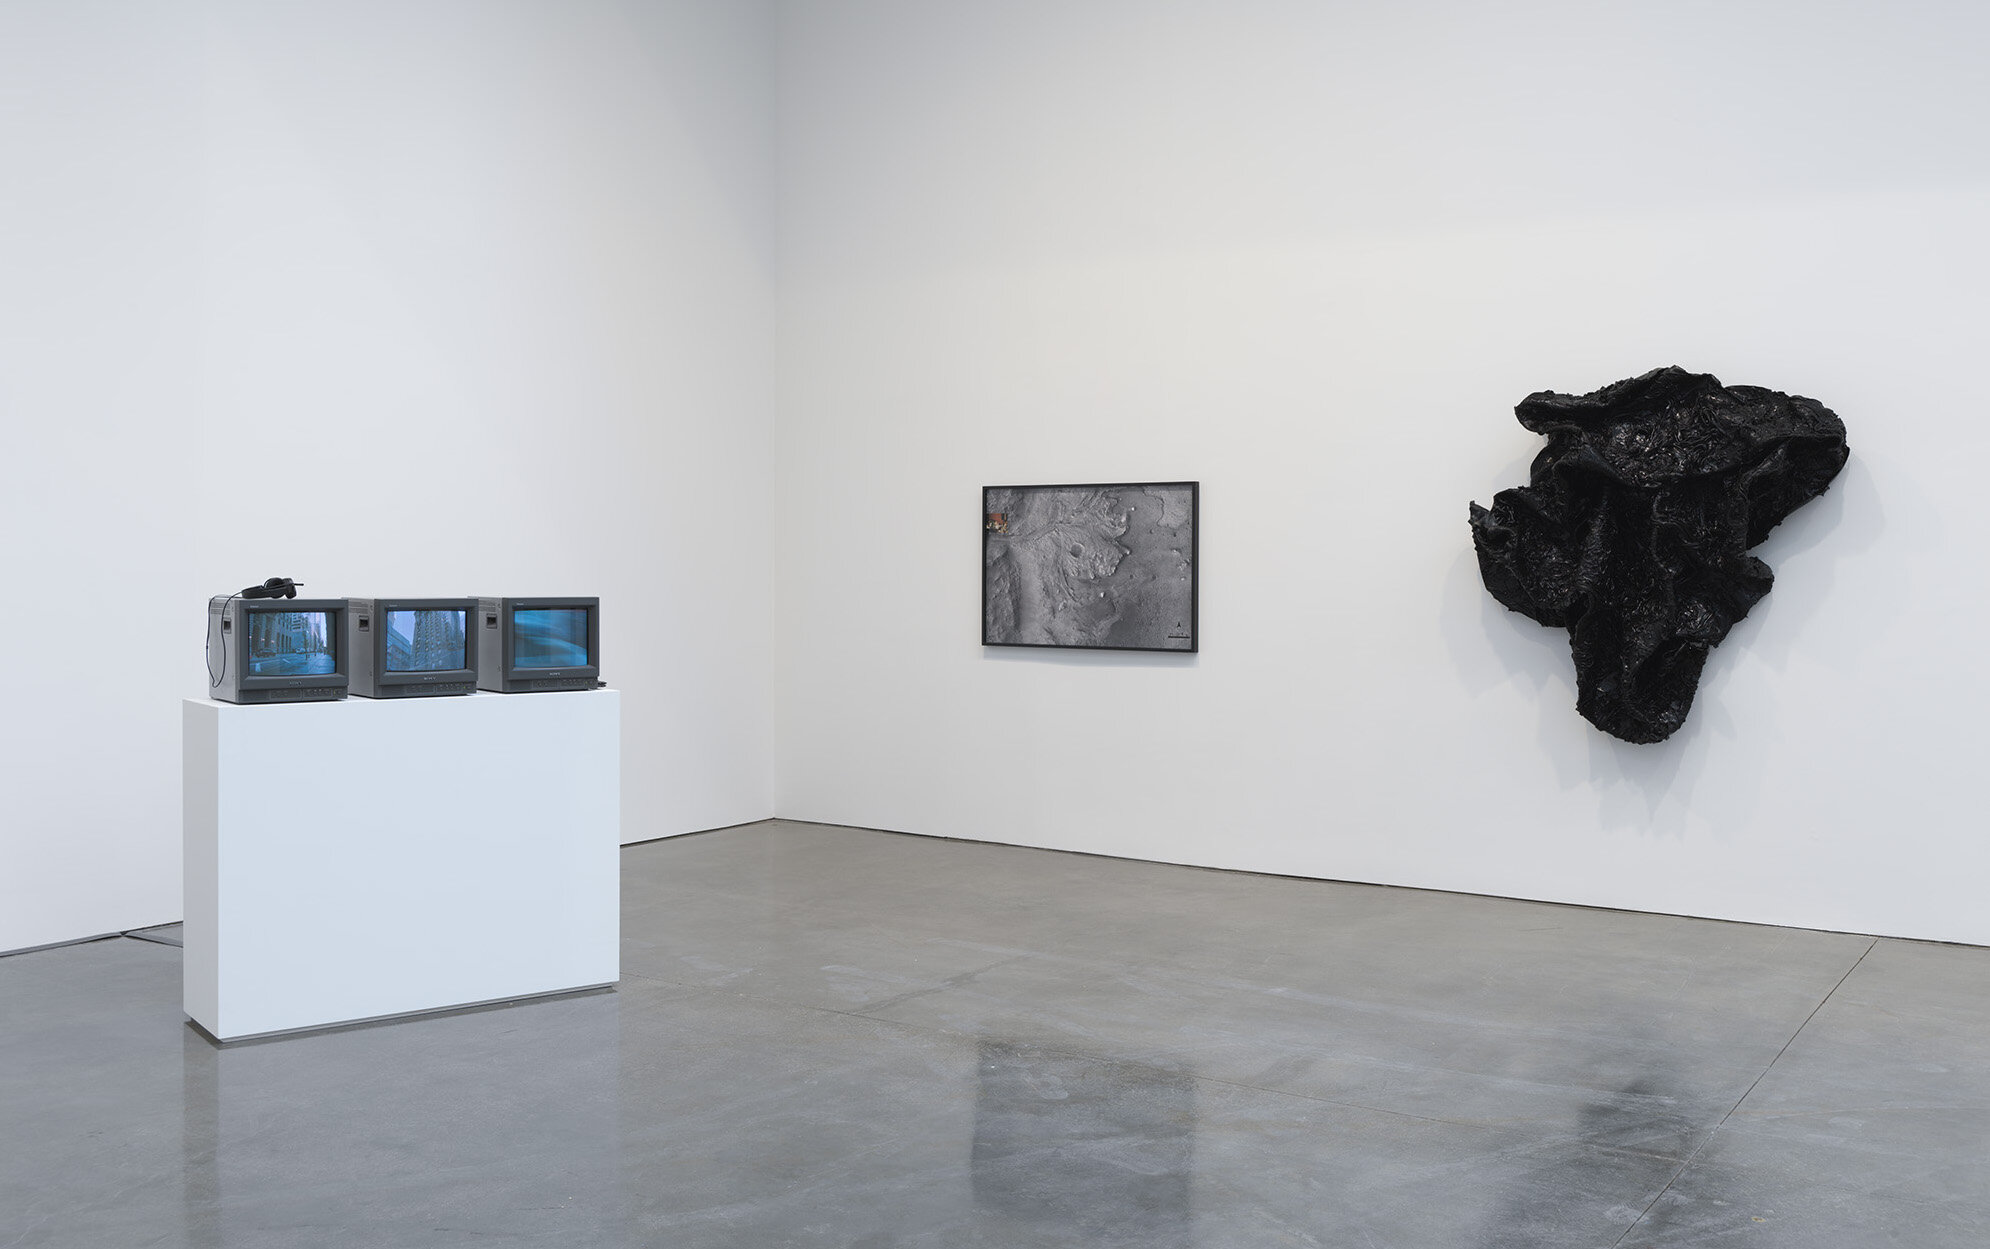 Installation View. Social Works curated by Antwuan Sargent at Gagosian